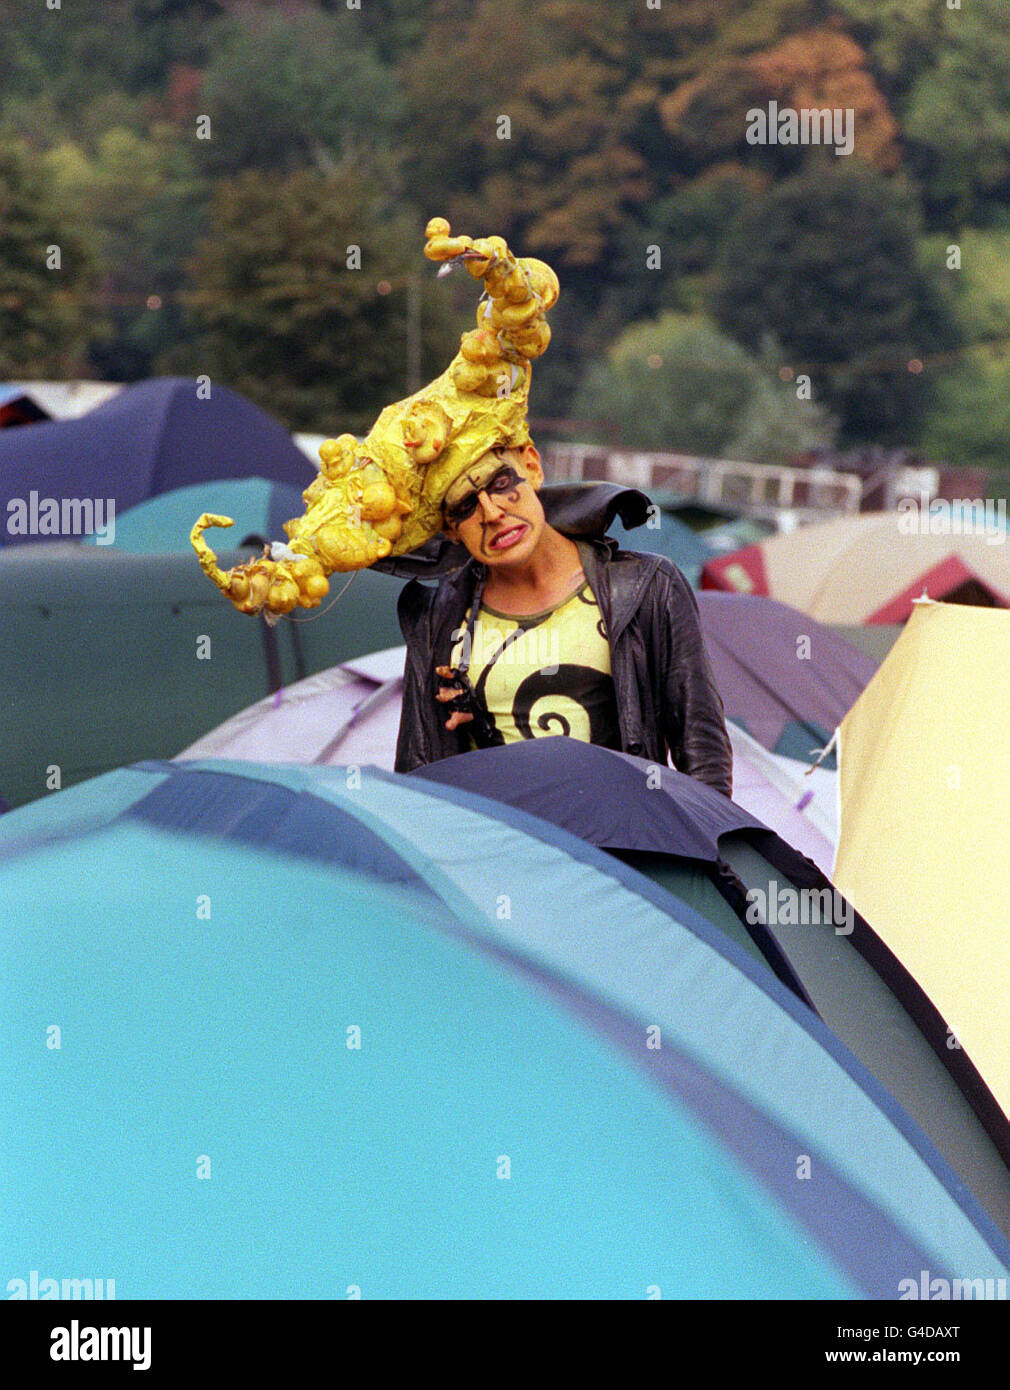 PA NEWS PHOTO 30/8/98 A FESTIVAL-GOER AT READING IN EYE-CATCHING MAKE-UP AND HEADGEAR. Stock Photo